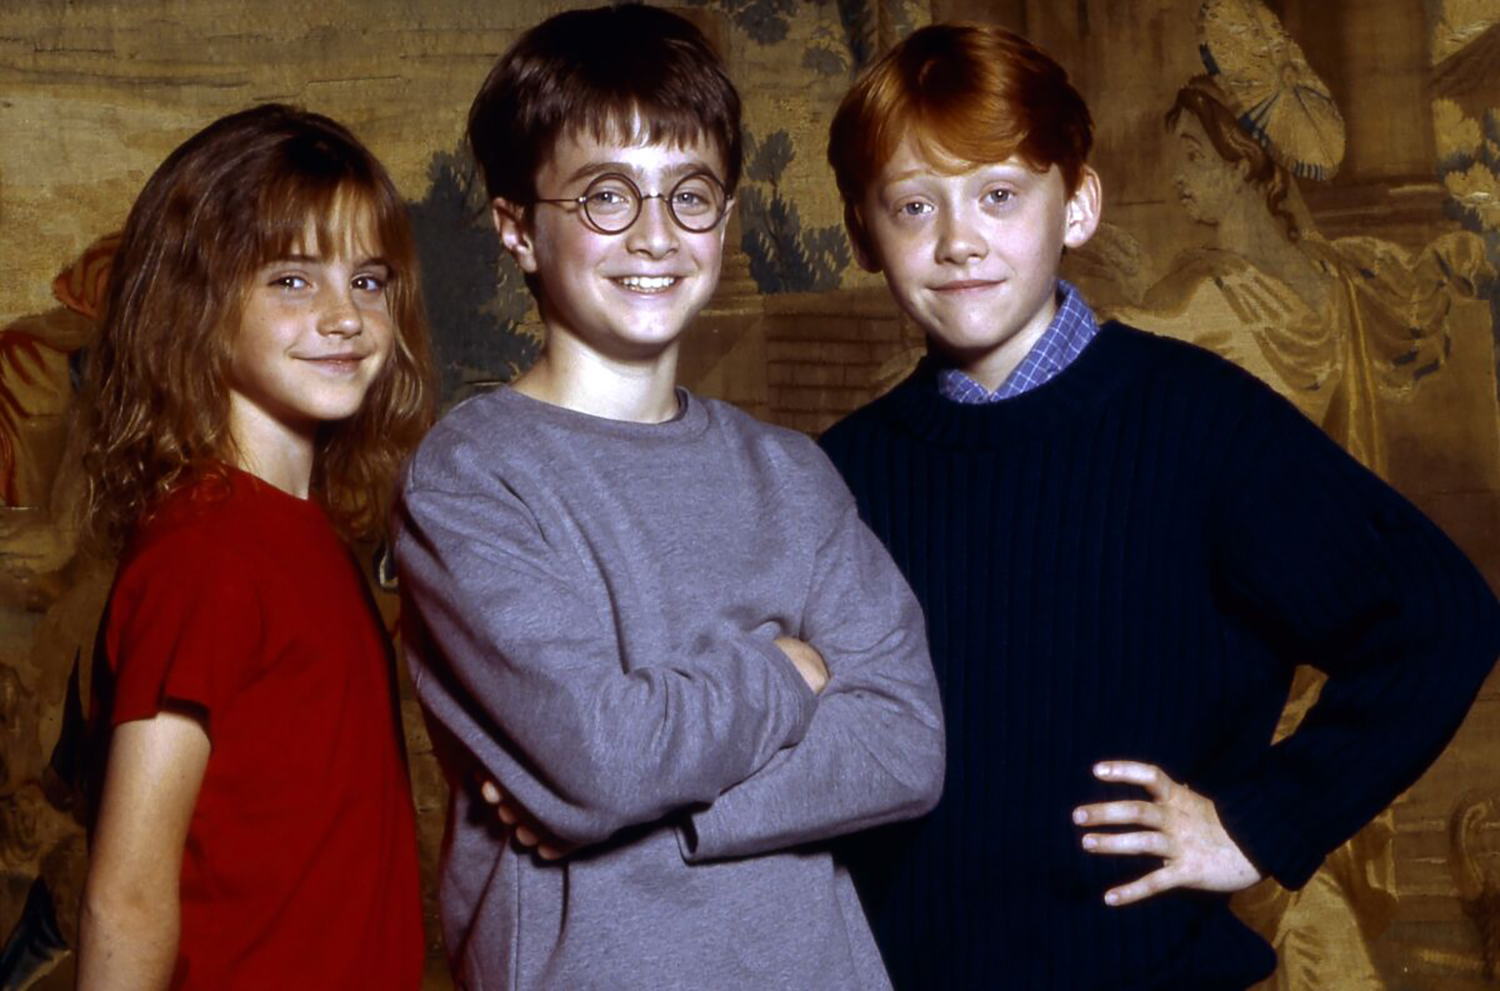 Young Harry Potter movie stars Emma Watson, Daniel Radcliffe, and Rupert Grint smile and pose together